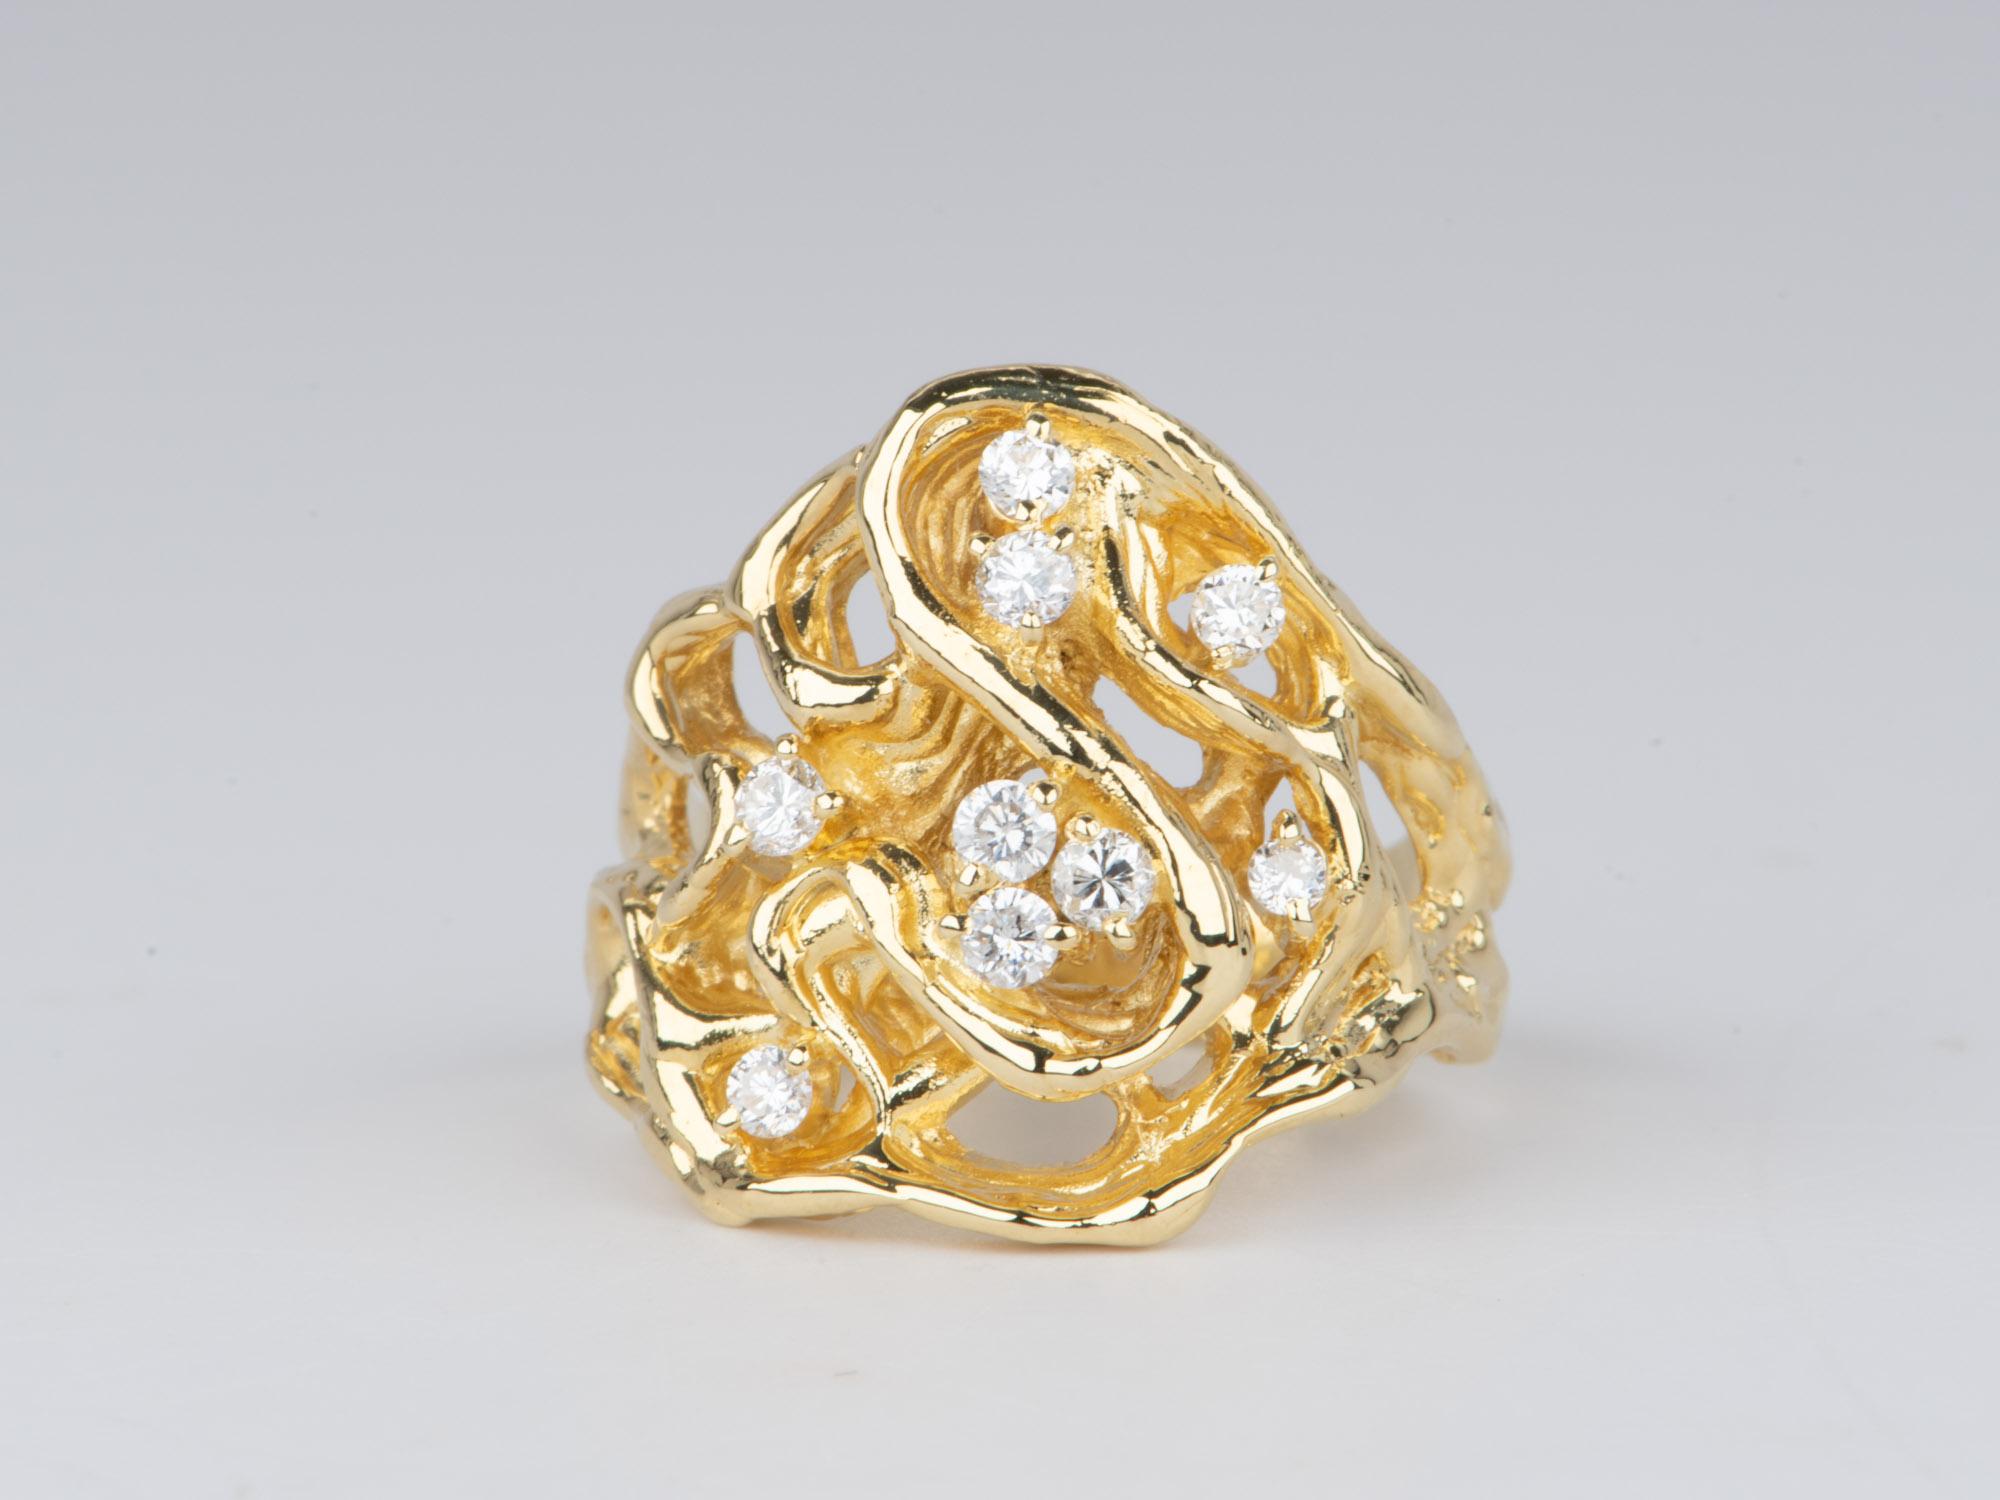 ♥ This is a stunning ring featuring heavy gold in a branch-like organic design with brilliant natural diamonds scattered within the branches
♥ The face of the ring measures 19.7mm in width (East West direction), 19mm in length (North South